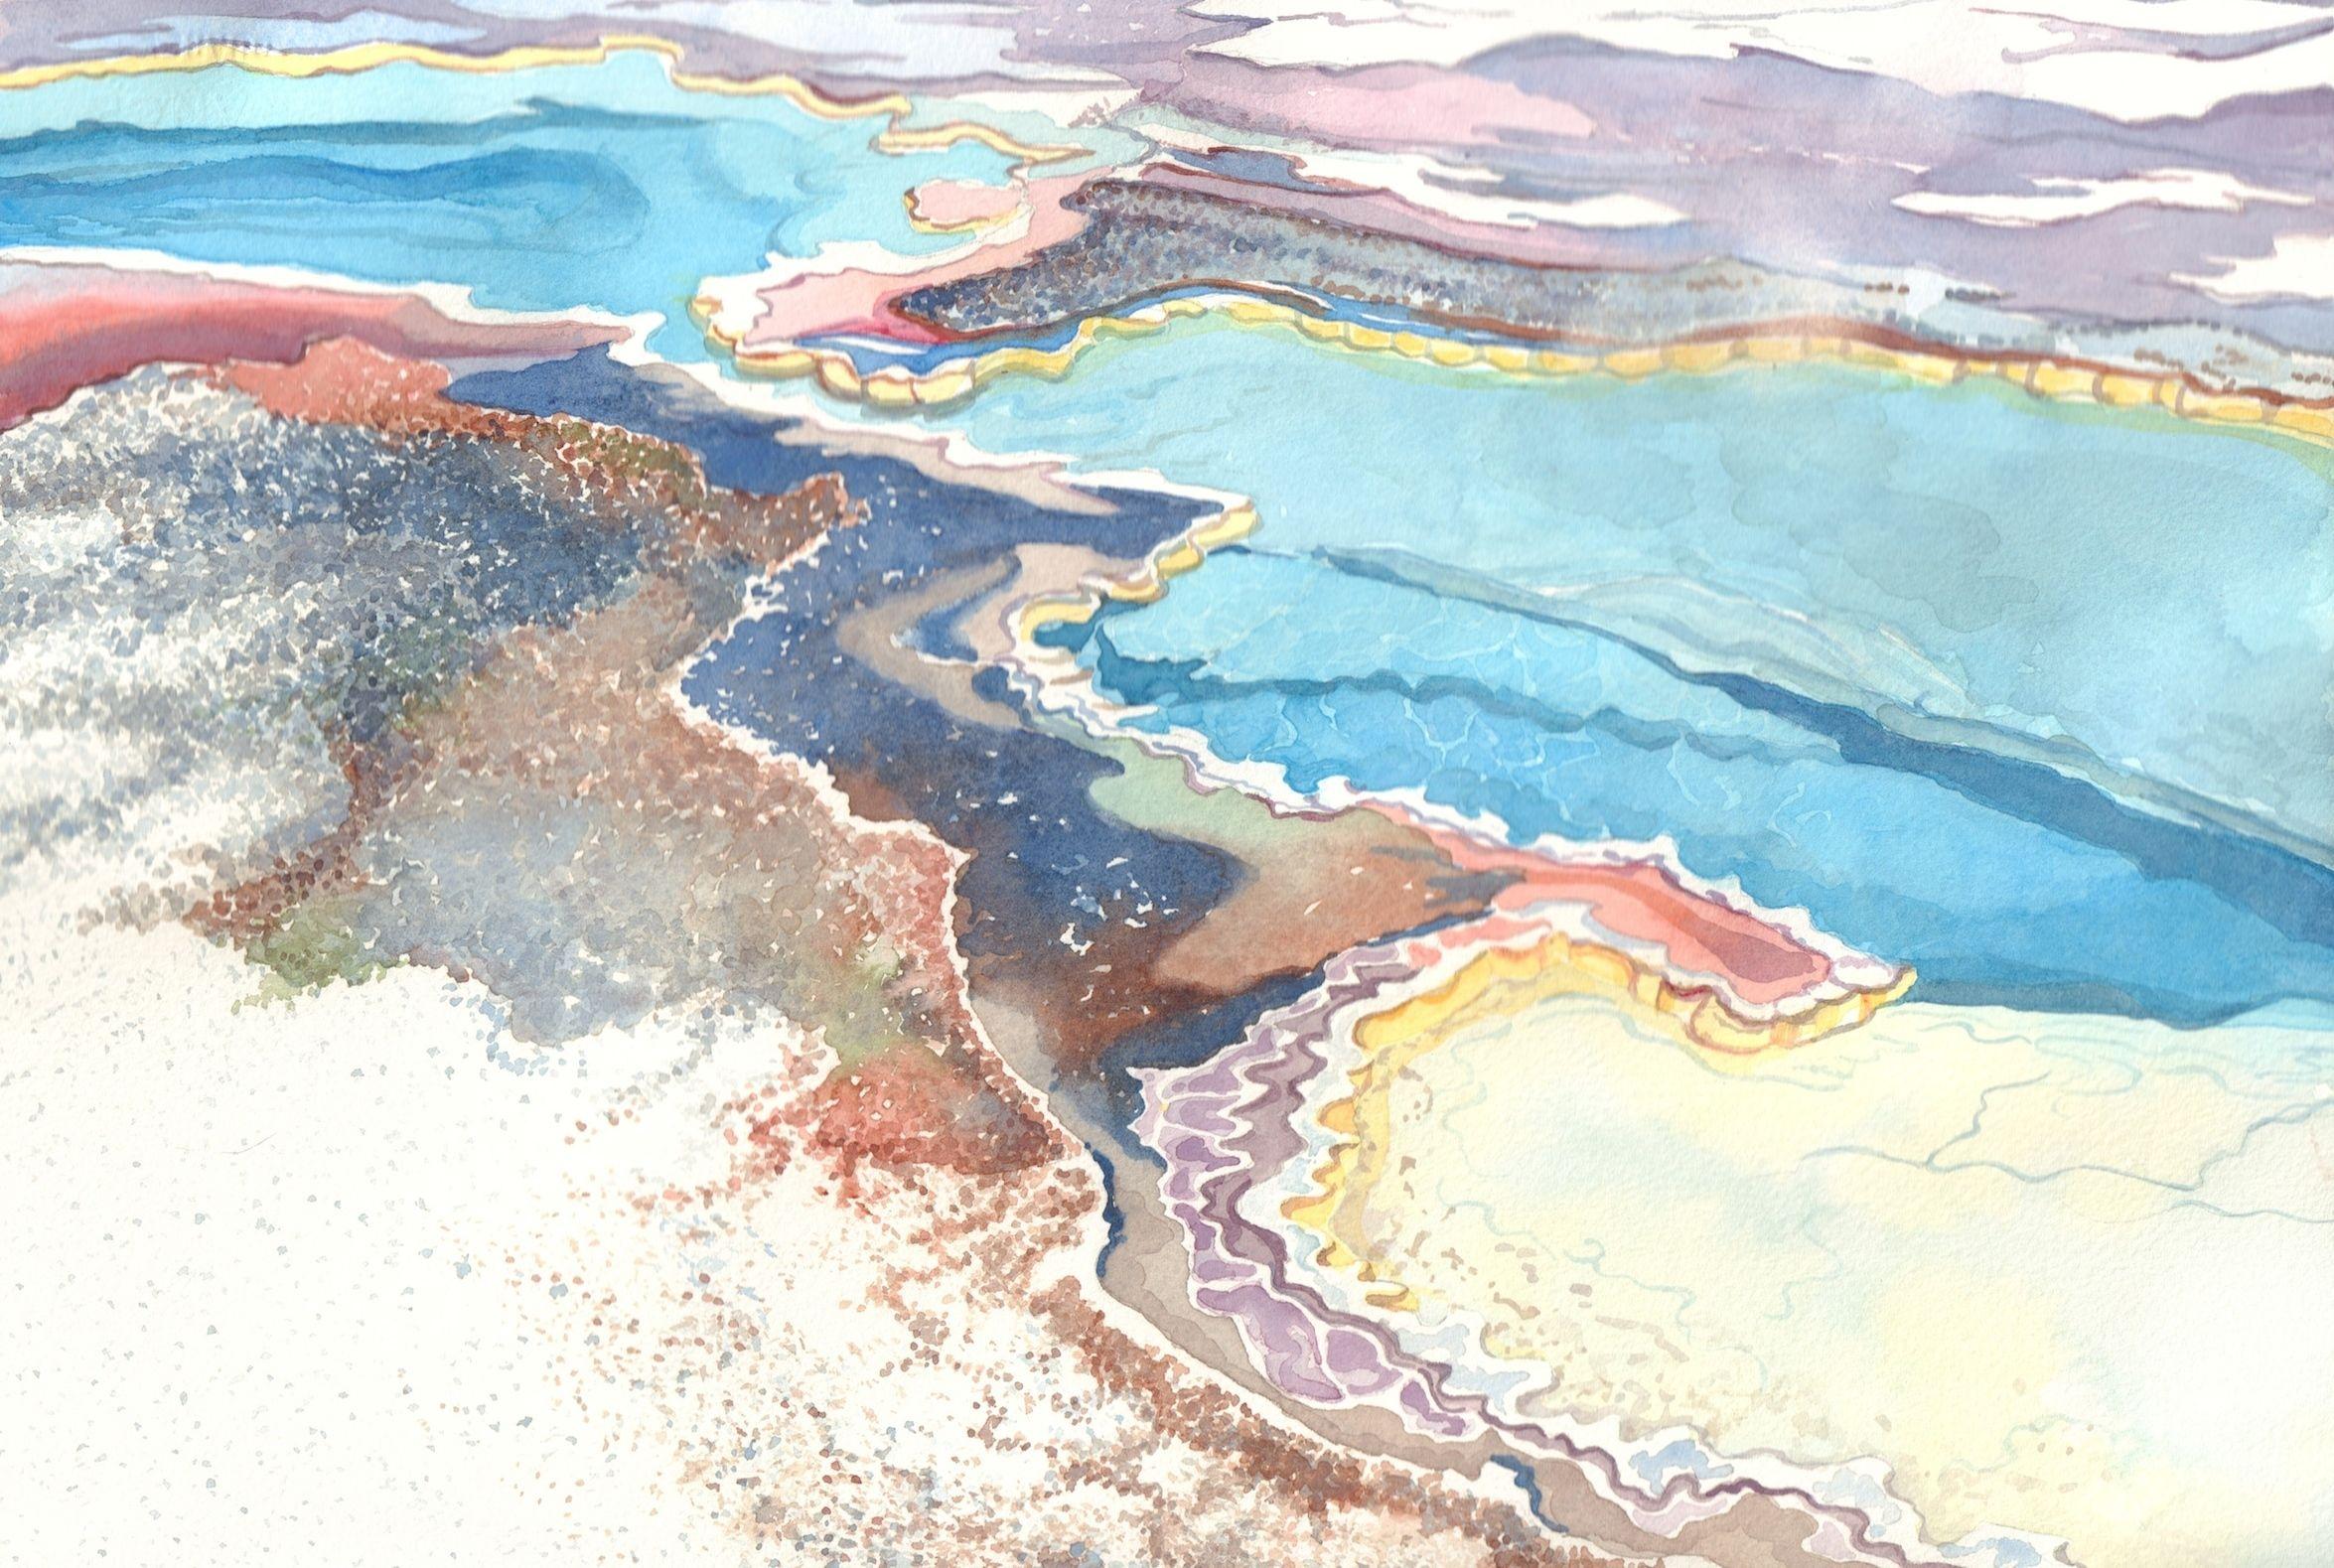 Doublette Pool, Painting, Watercolor on Watercolor Paper - Art by Leslie White